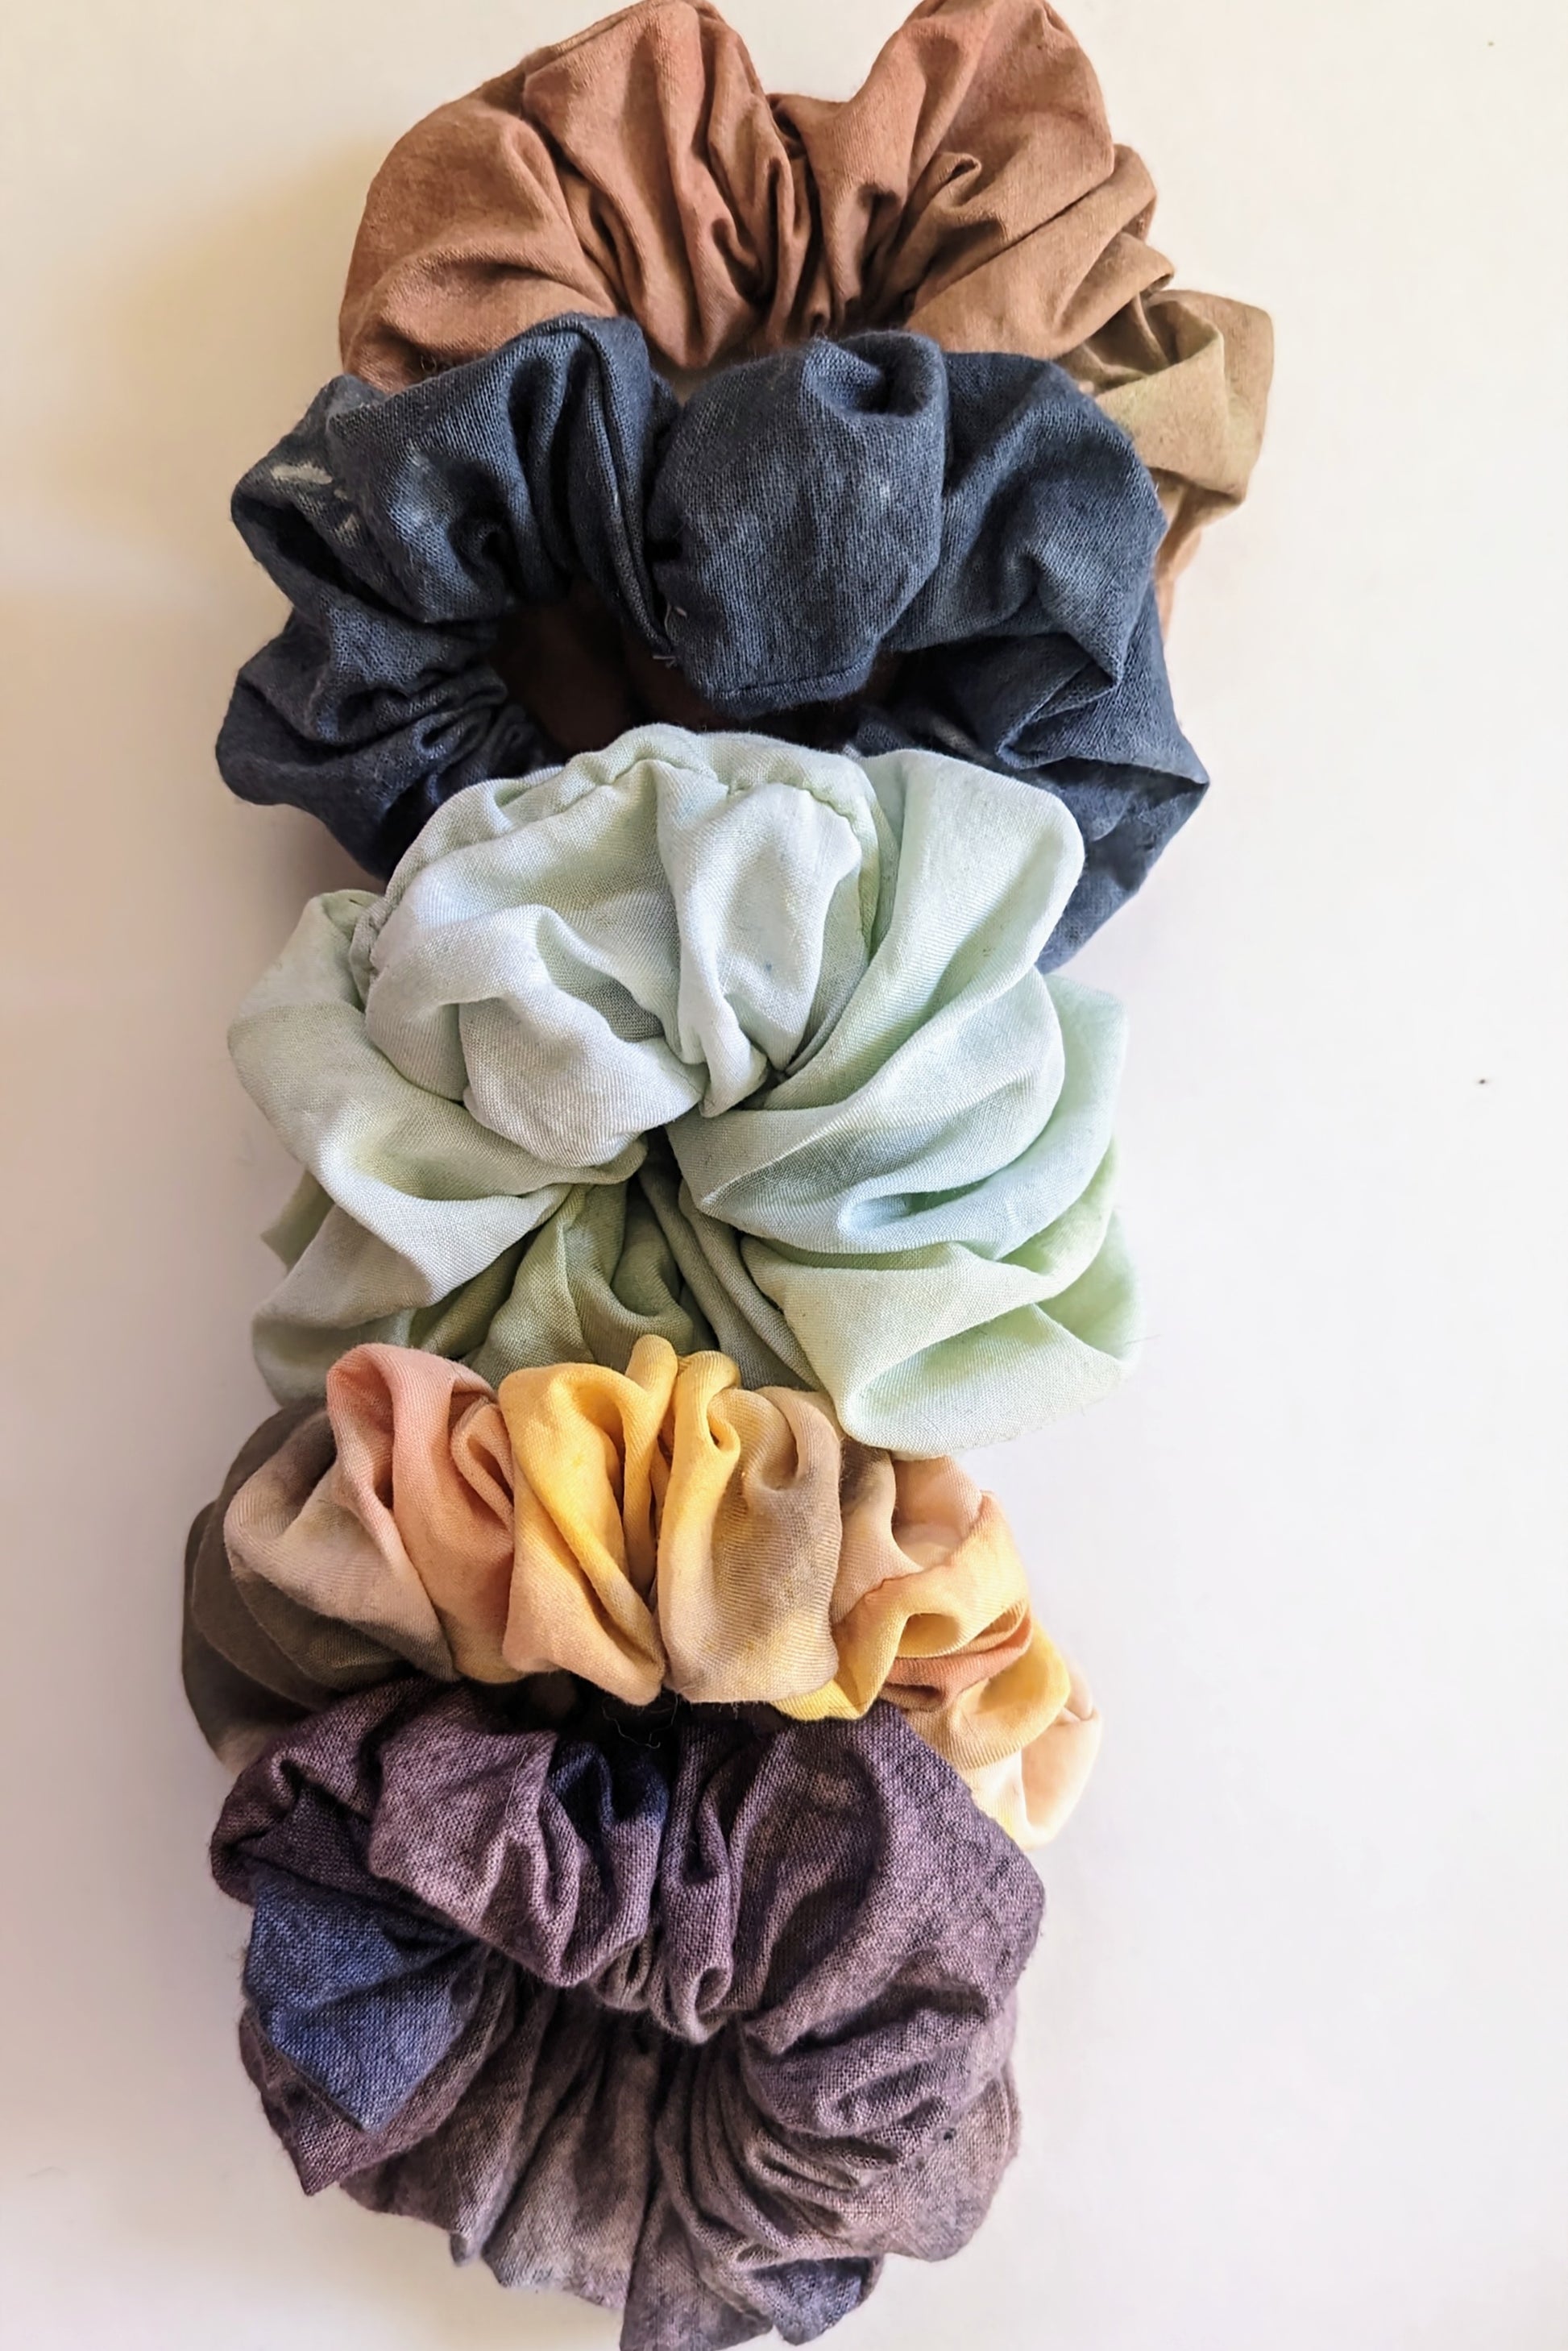 Hand-Dyed Cotton Scrunchie Bundle by Connally Goods